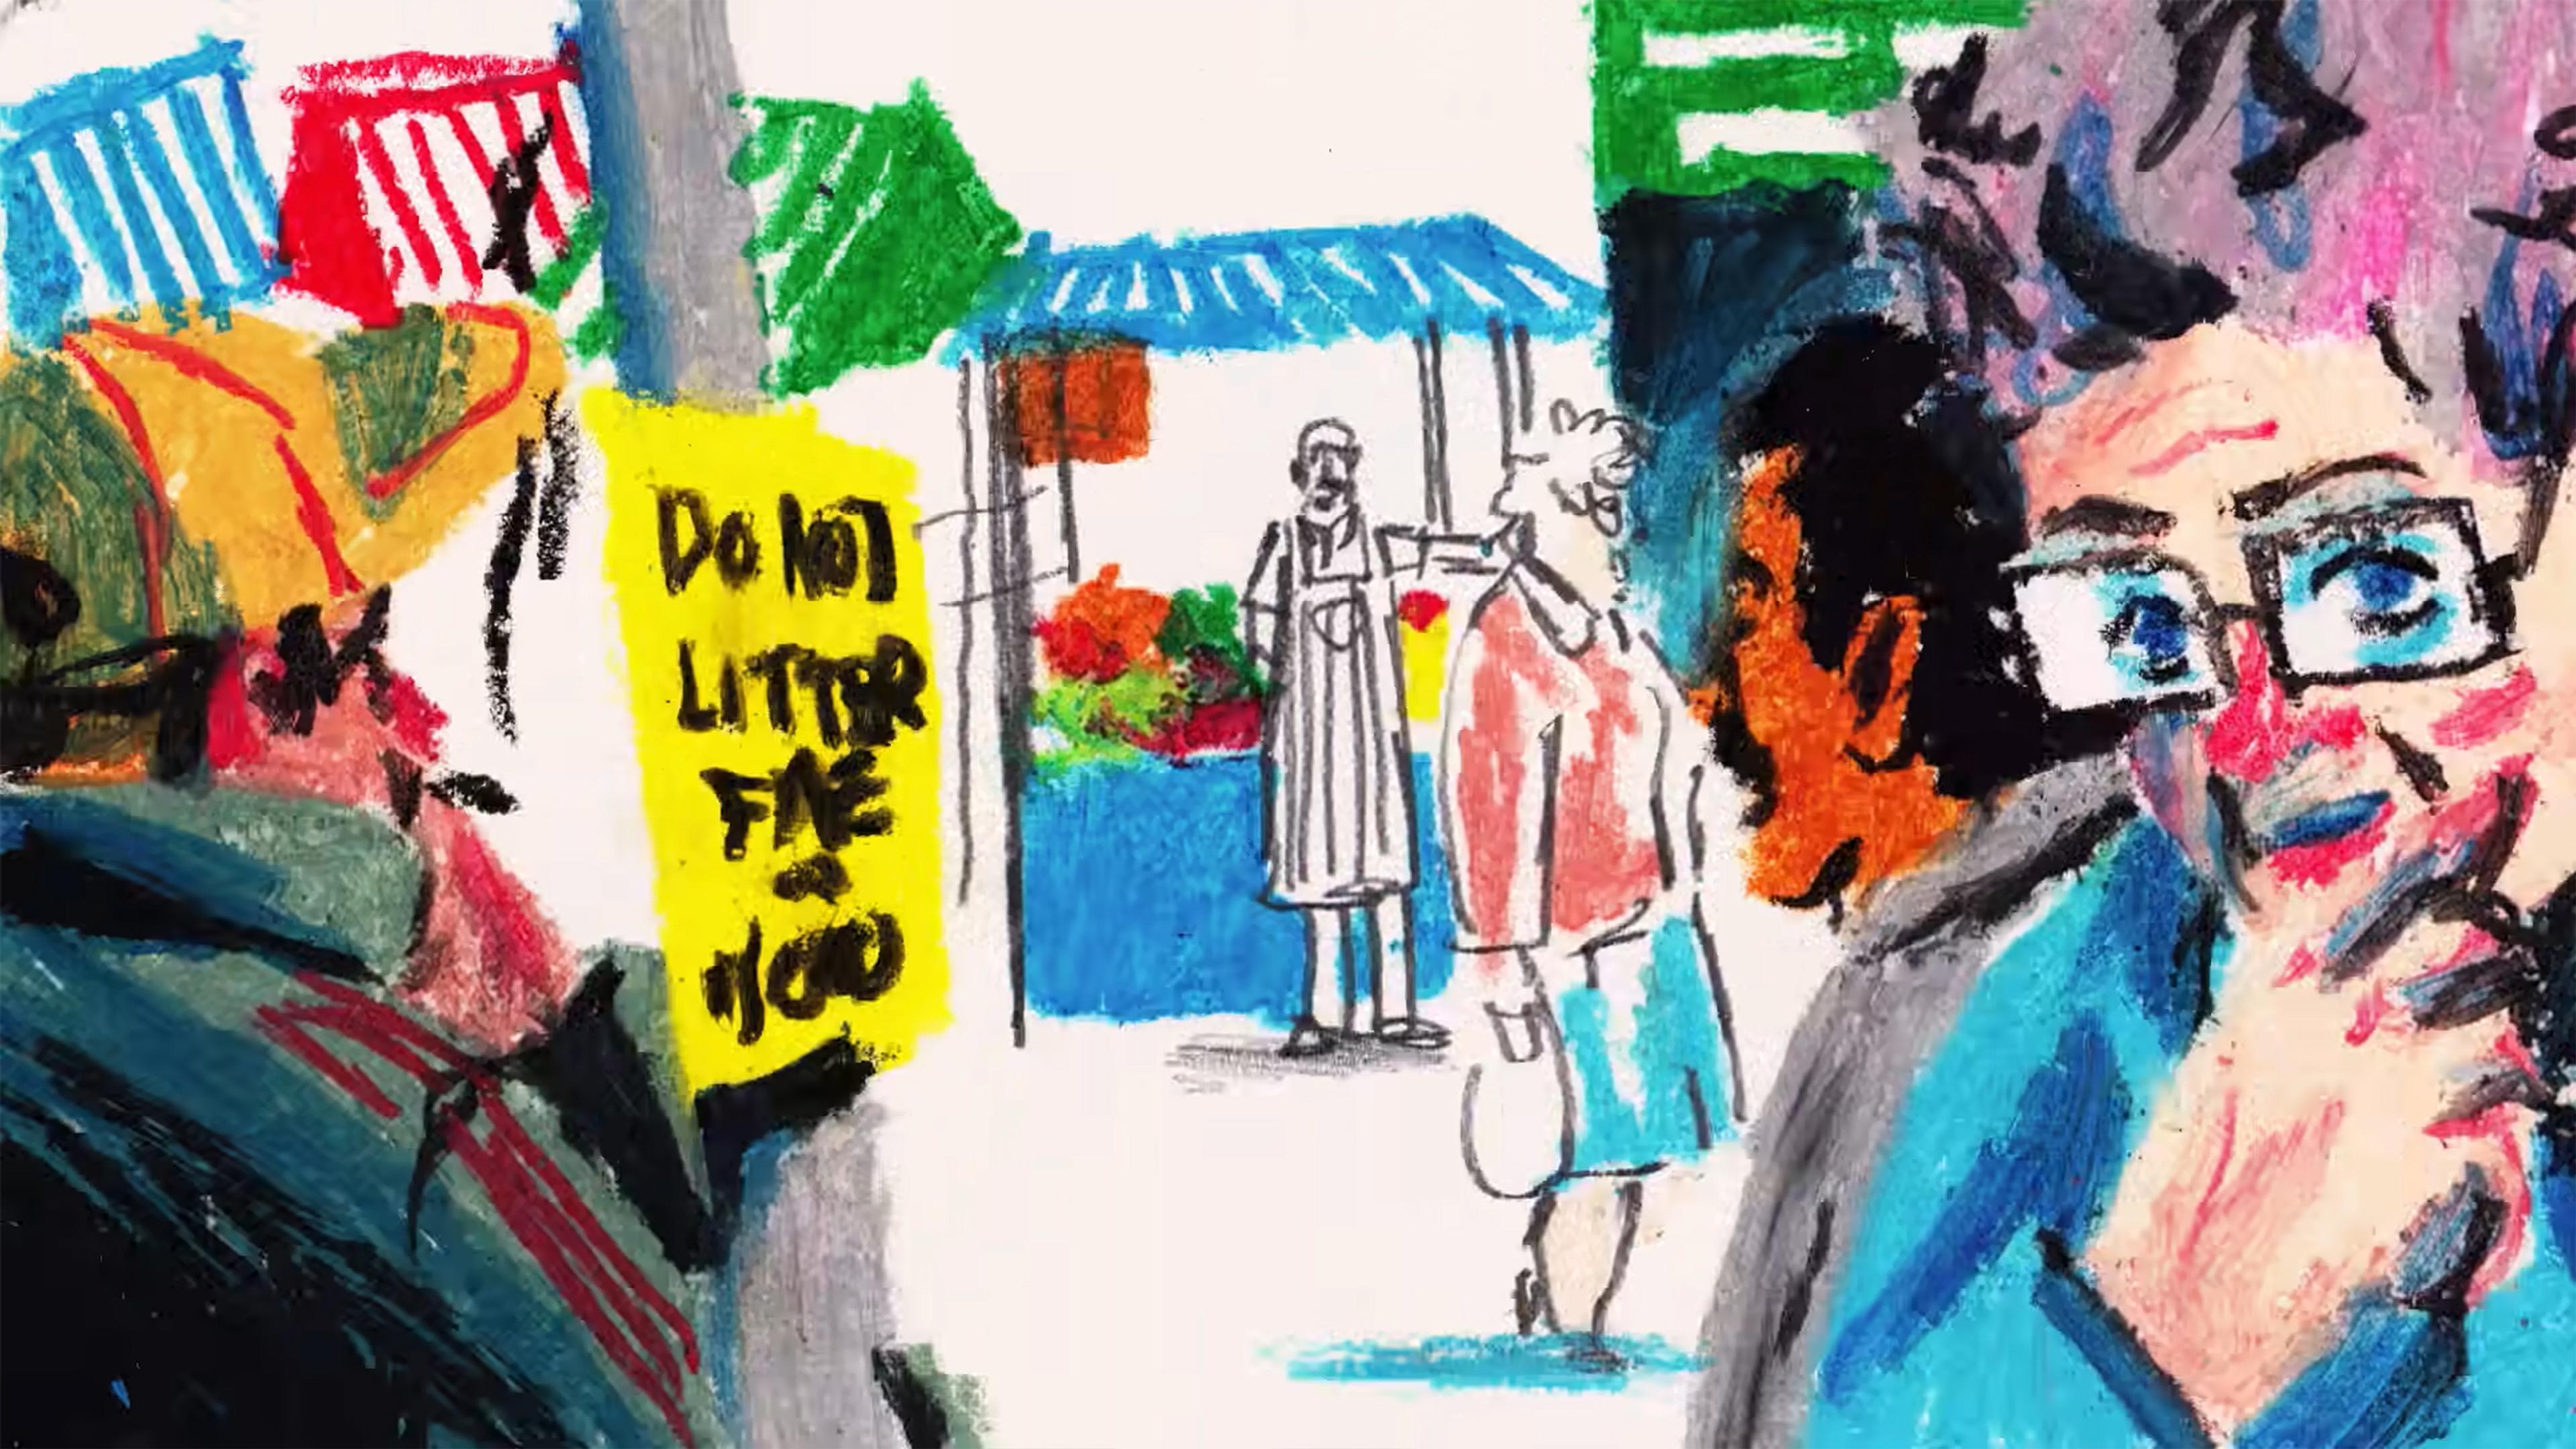 Colourful hand-drawn illustration of a busy market scene. Background shows fruit stall and vendor. A yellow sign reads DO NOT LITTER.